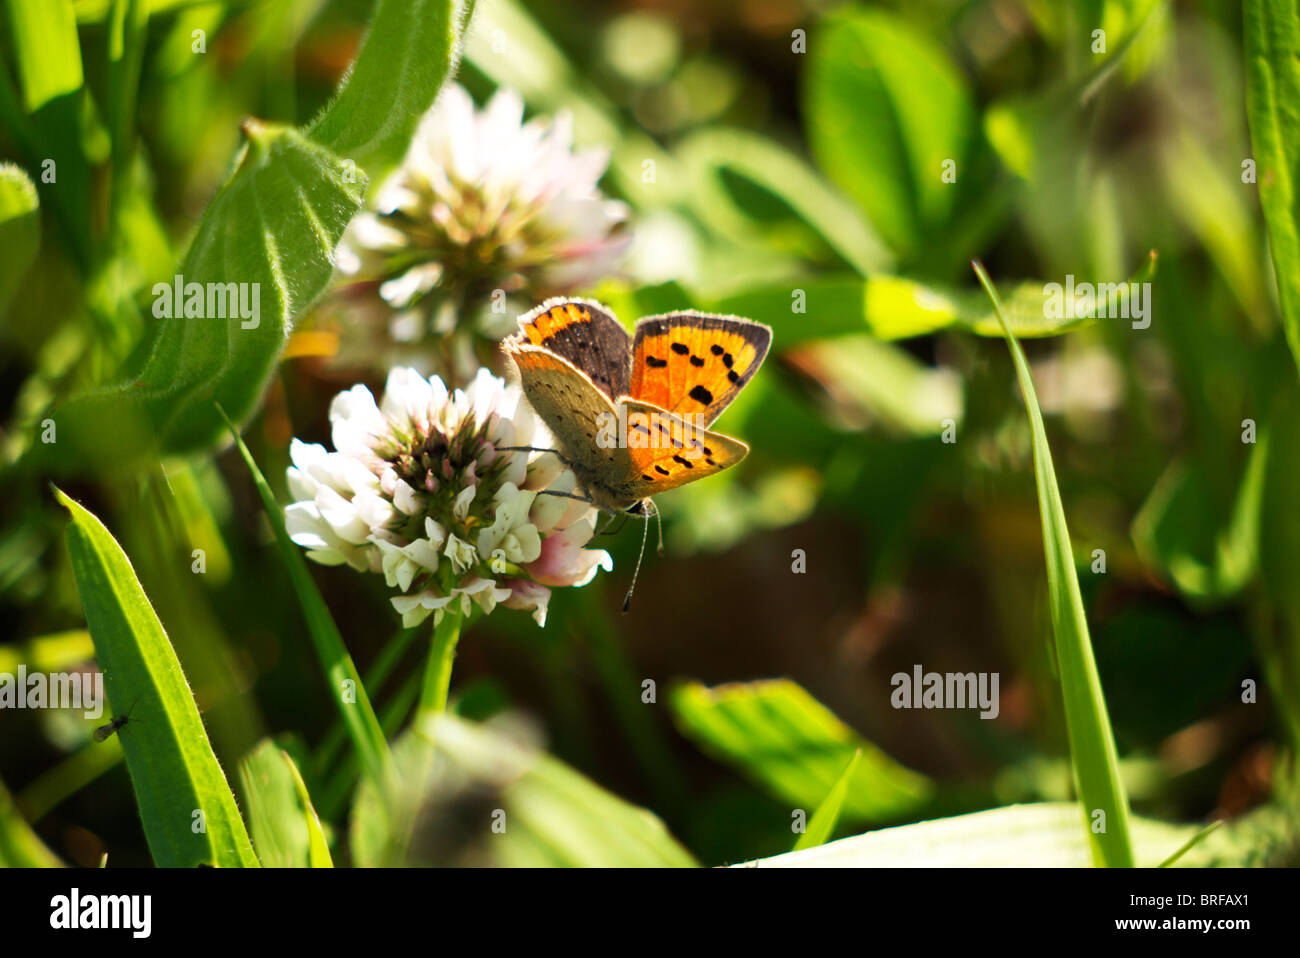 A small Copper butterfly at rest in a wild meadow of flowers Stock Photo